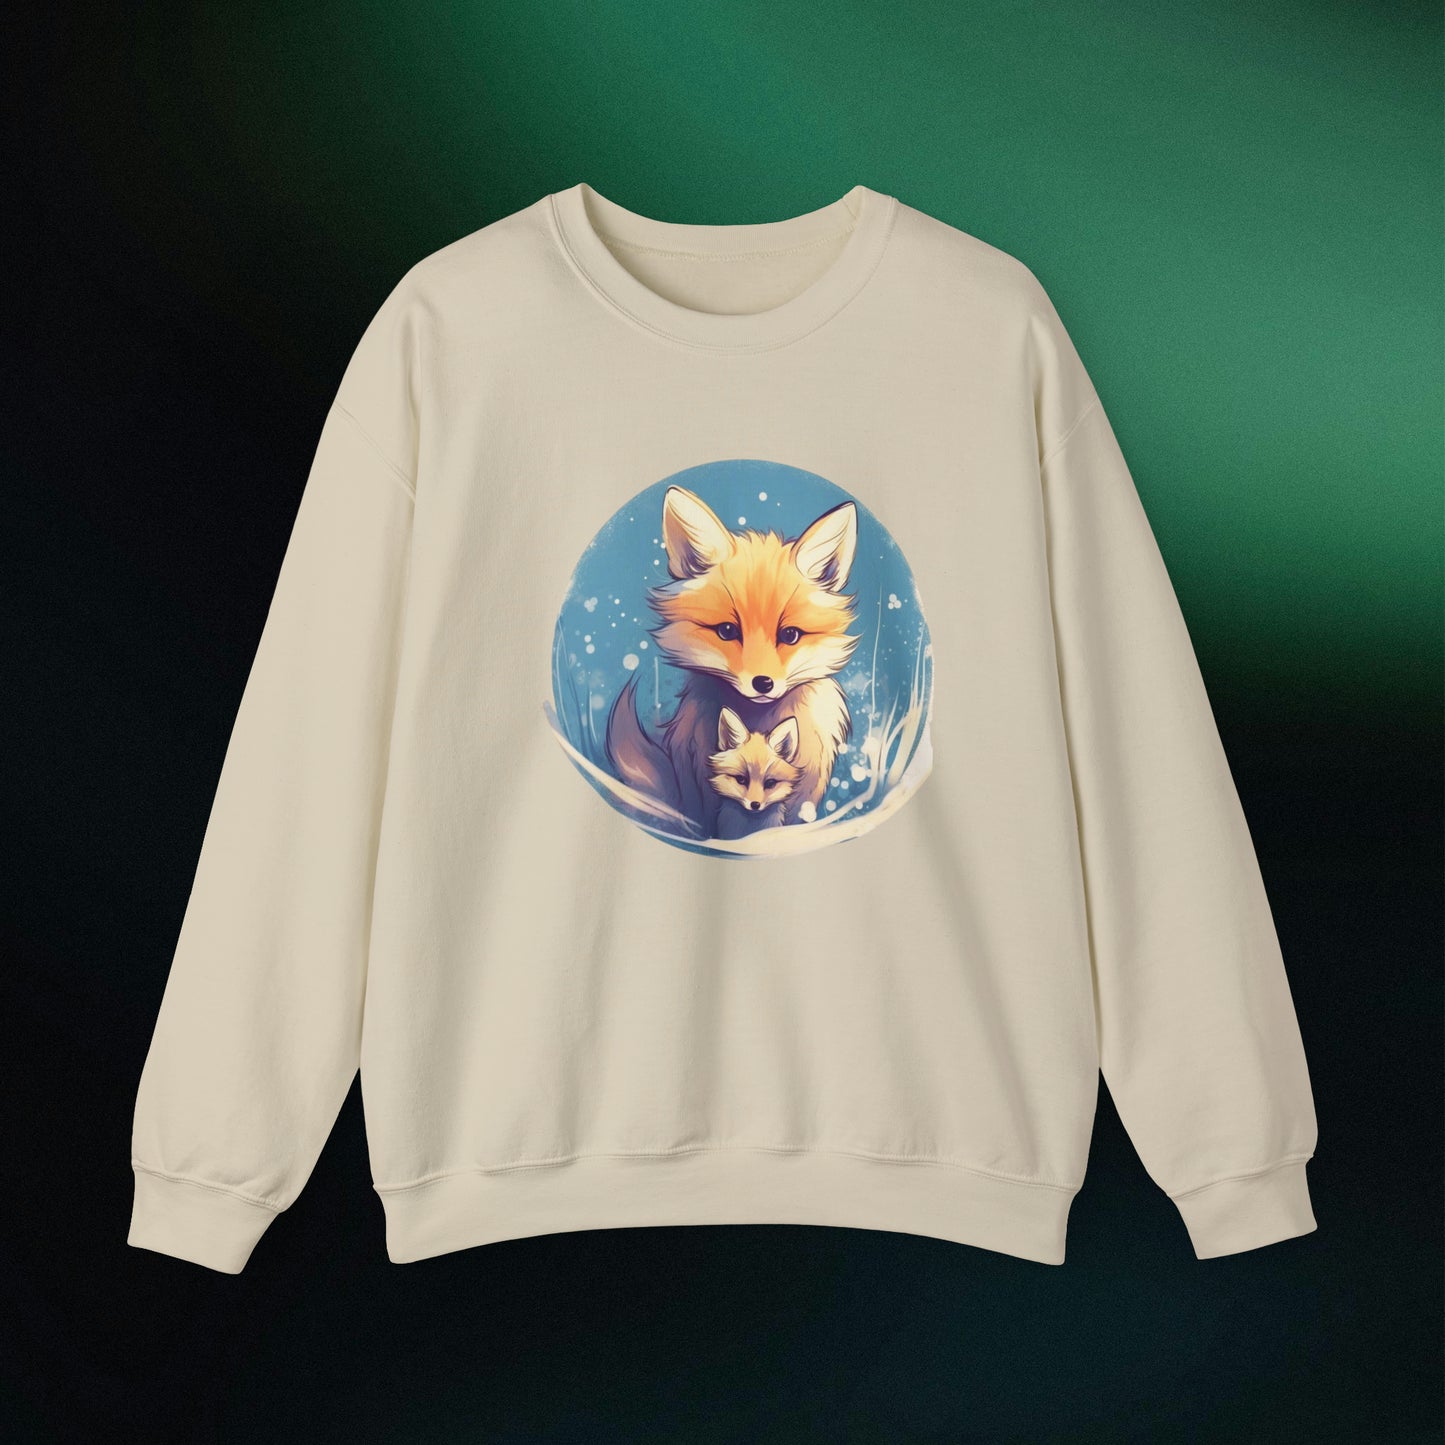 Vintage Forest Witch Aesthetic Sweatshirt - Cozy Fox Cottagecore Sweater with Mommy and Baby Fox Design Sweatshirt S Sand 